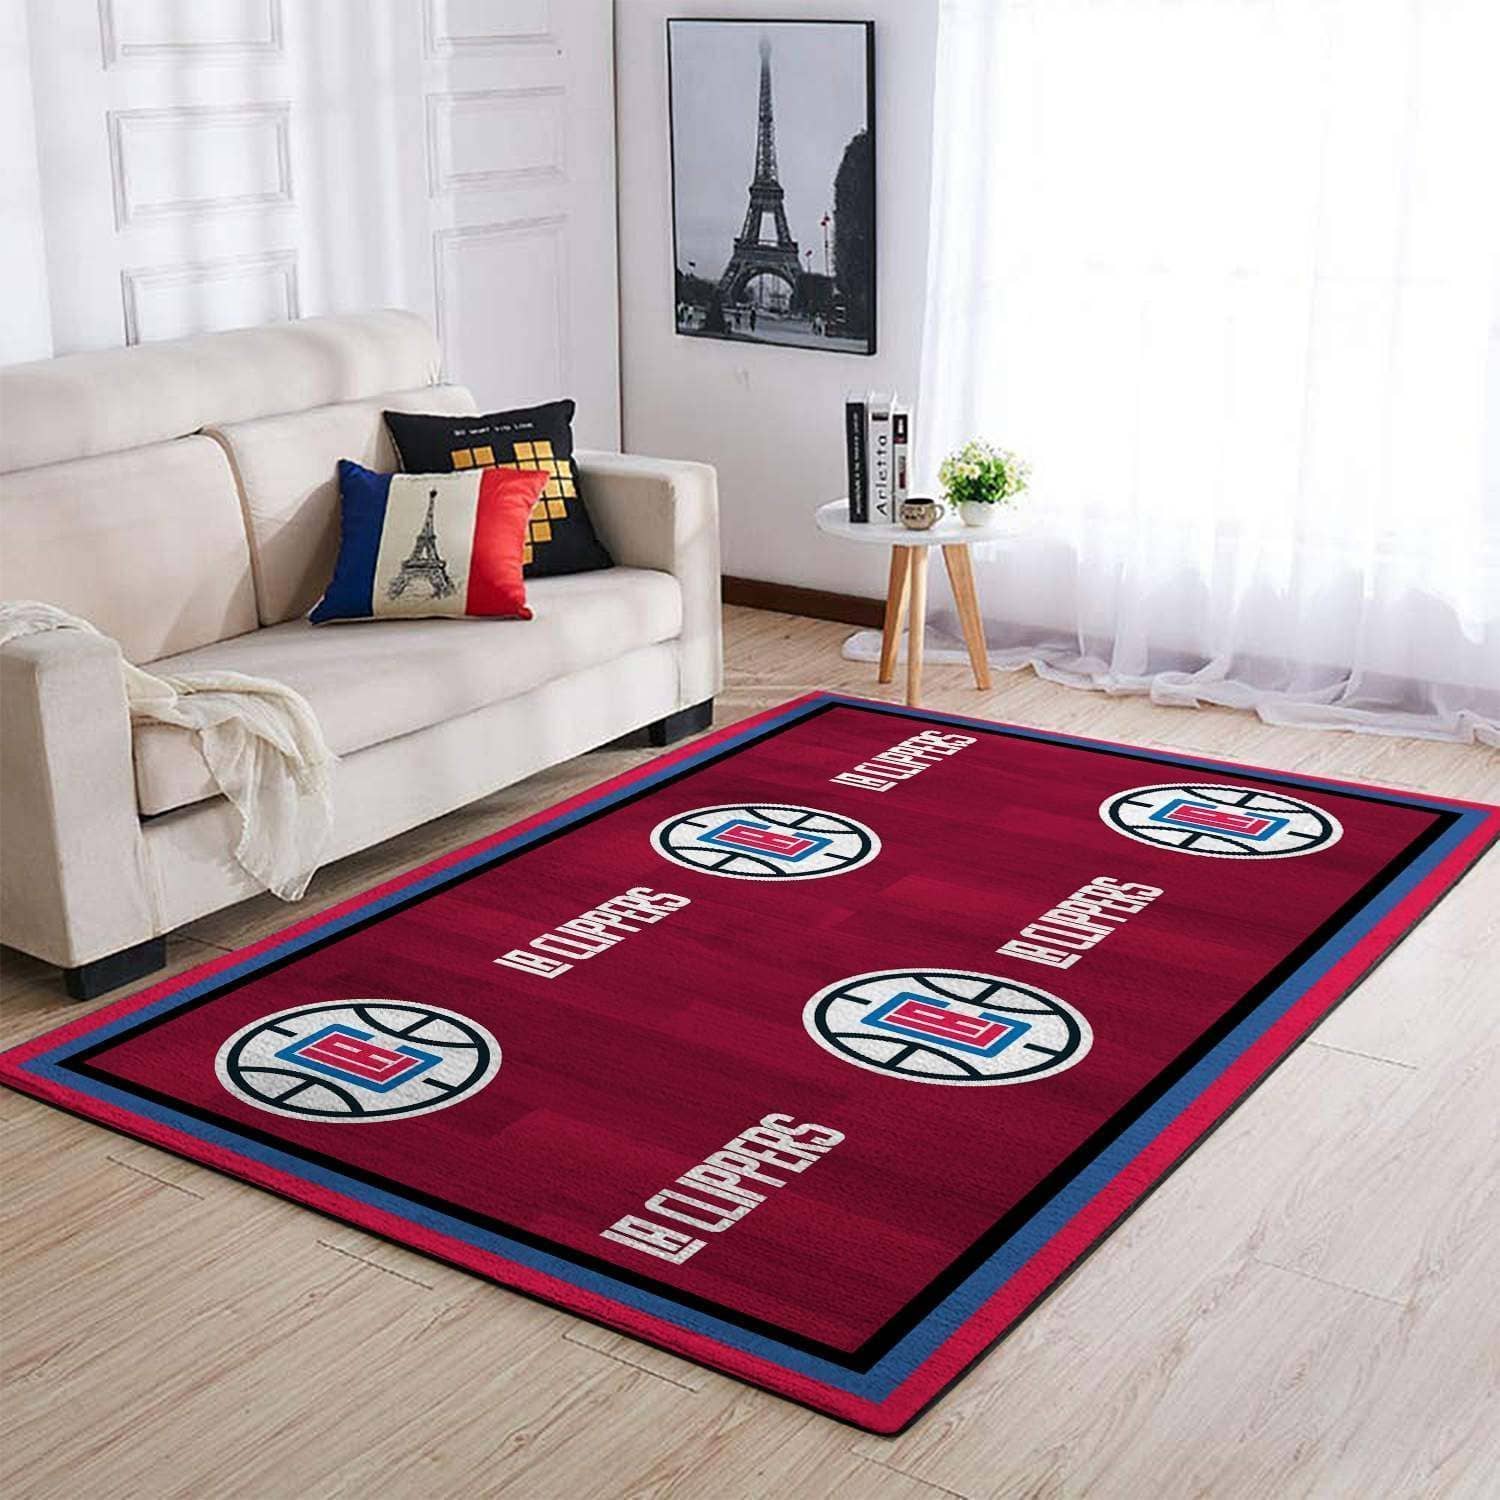 Amazon Los Angeles Clippers Living Room Area No3576 Rug